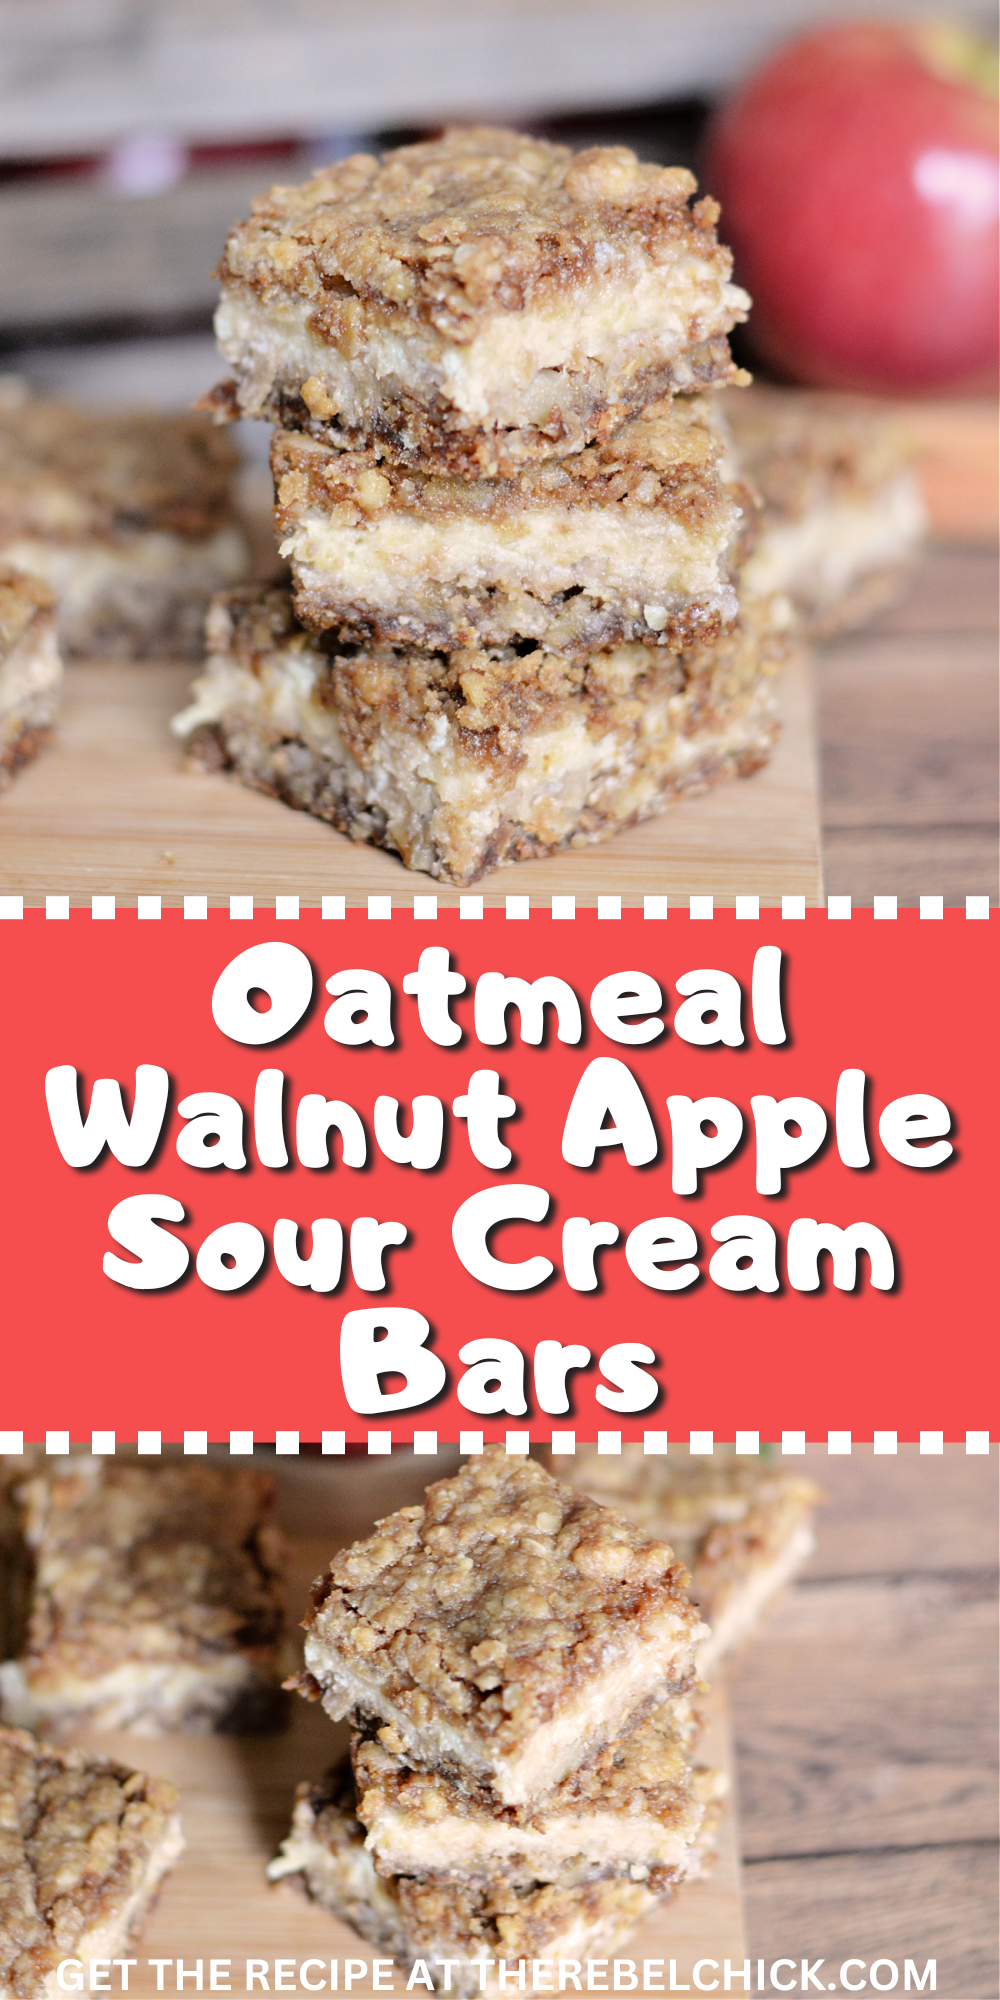 stack of oatmeal bars filled with apples and sour cream 